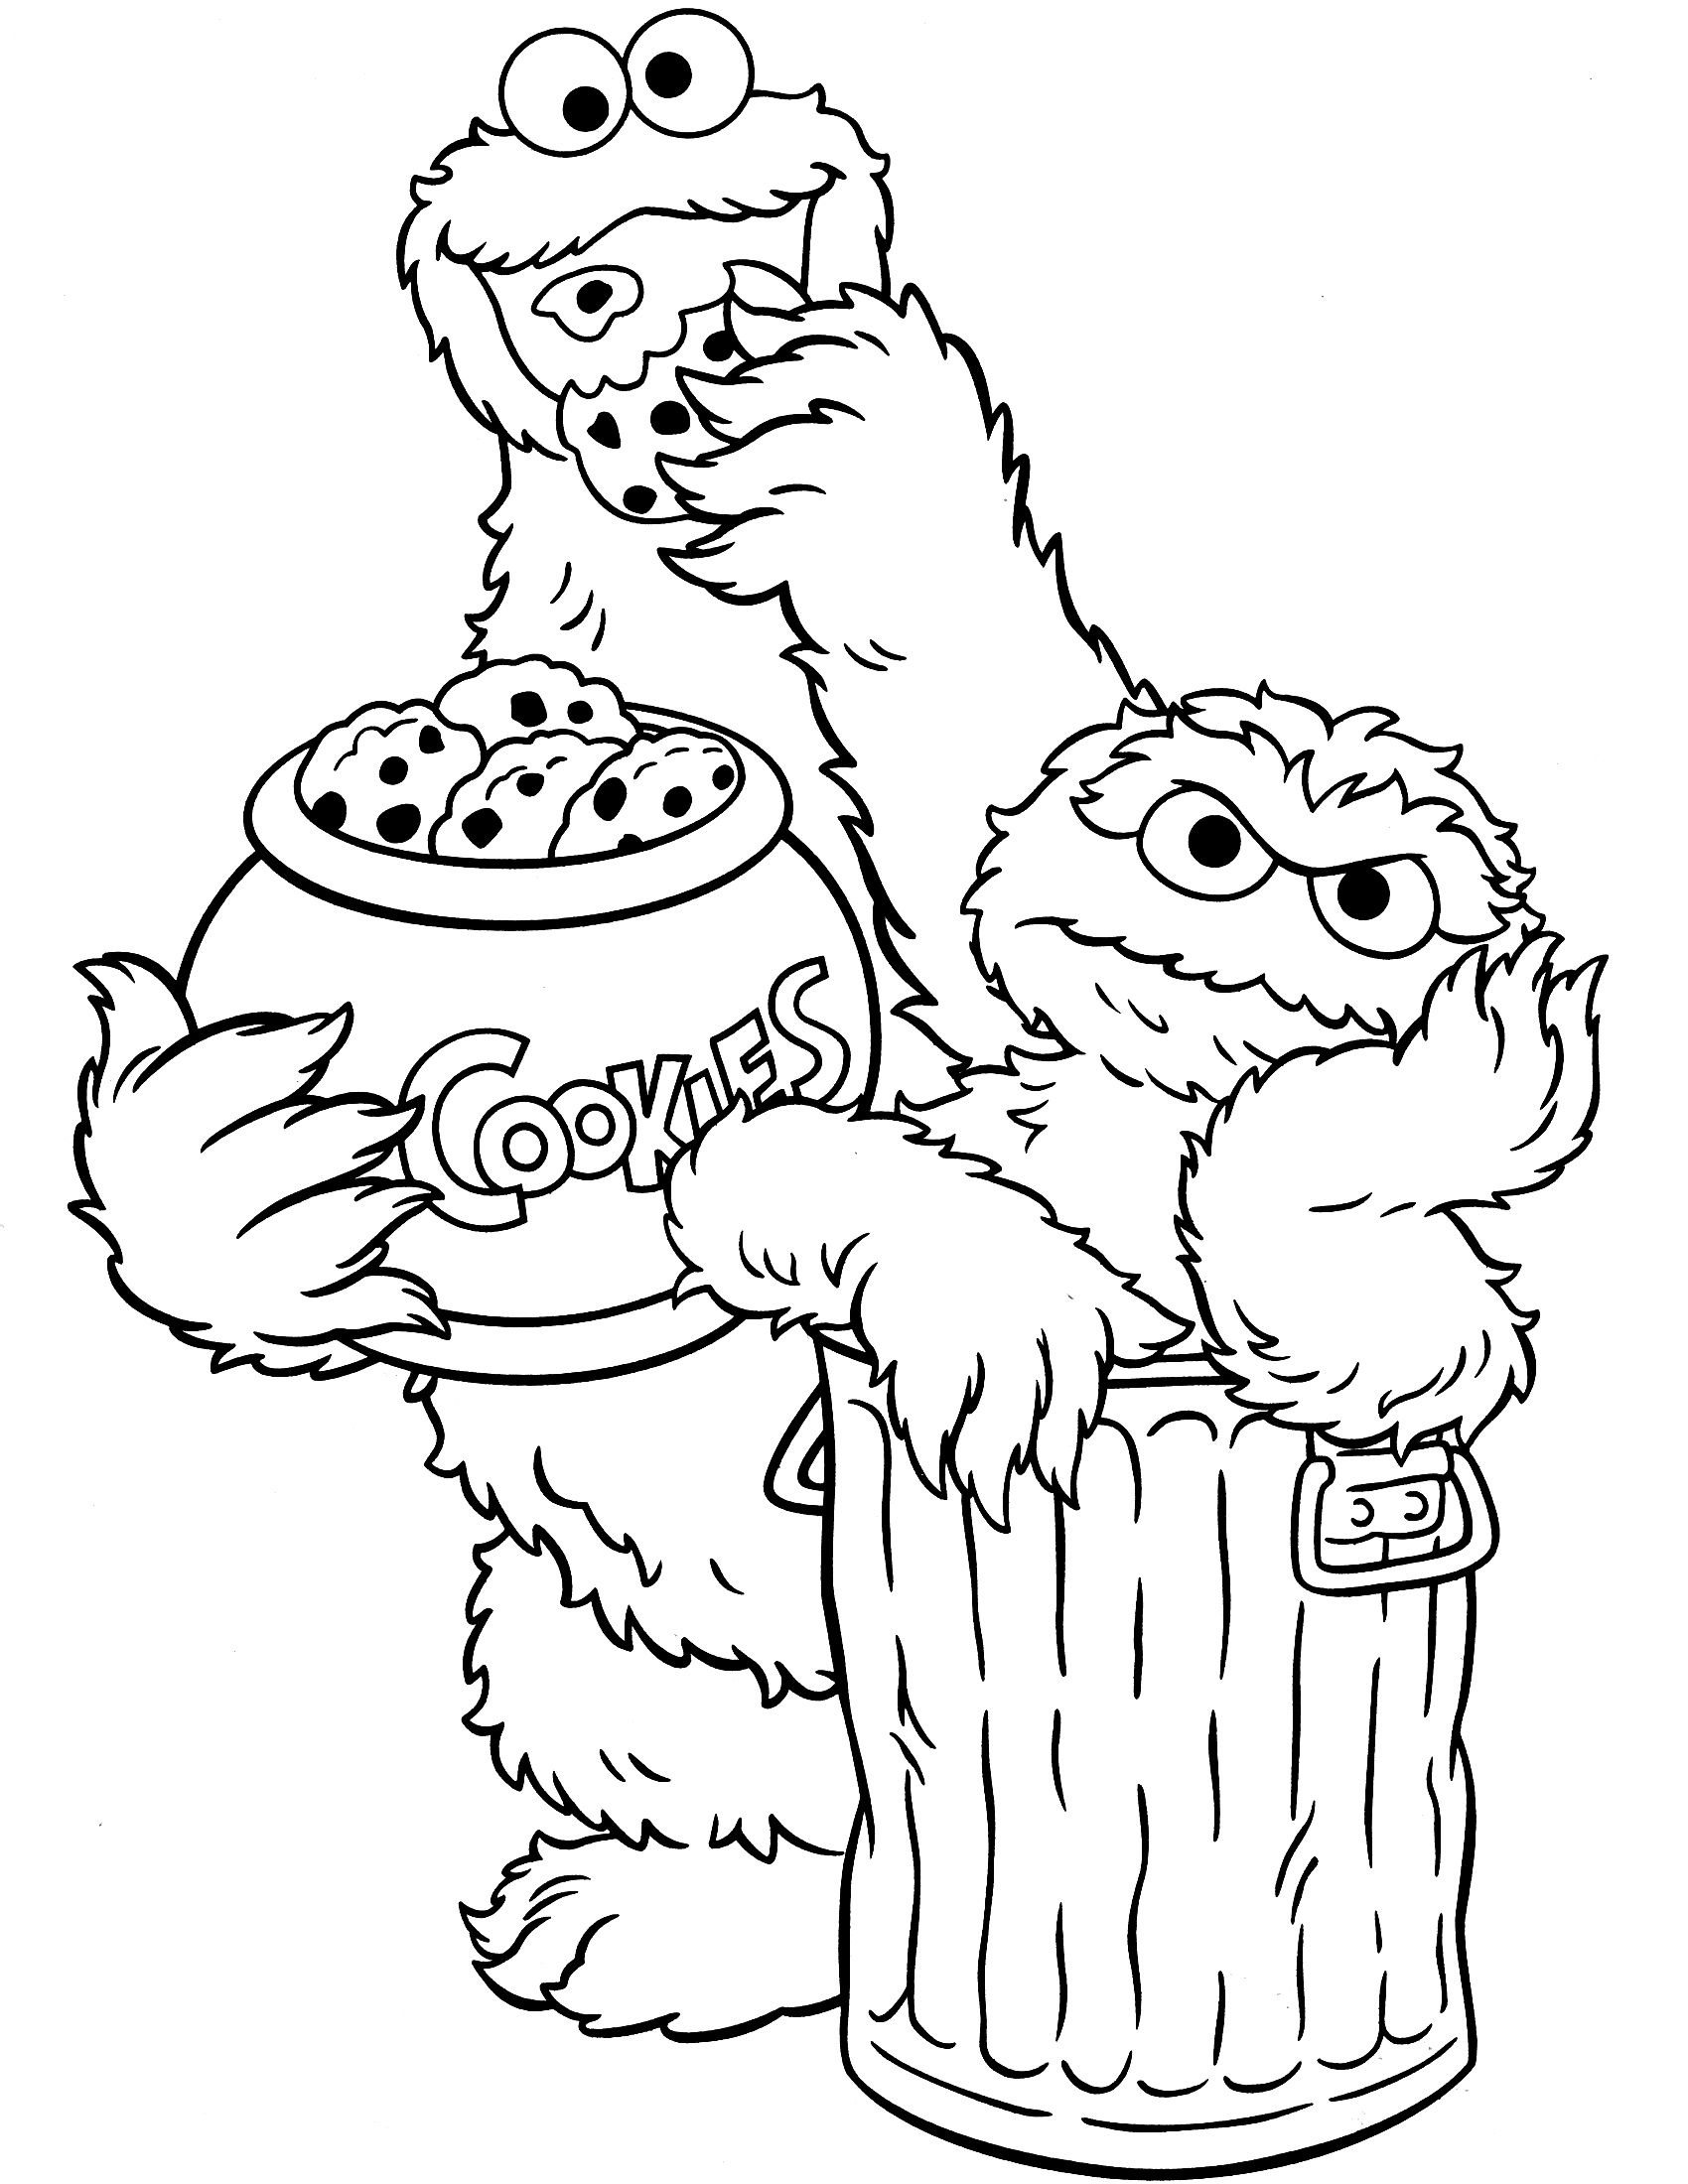 72 Oscar the Grouch Coloring Pages Printable 11